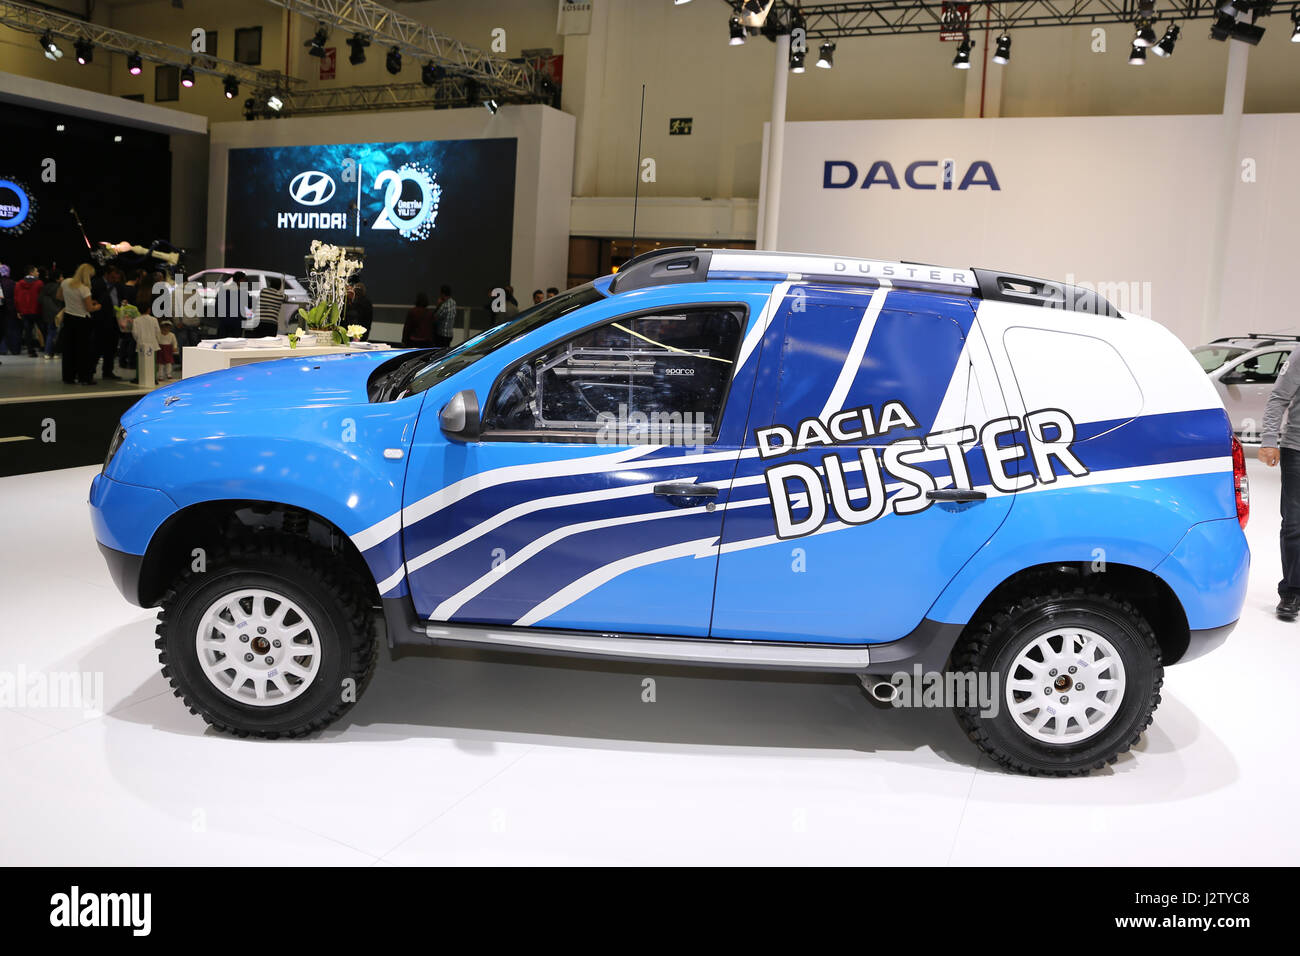 ISTANBUL, TURKEY - APRIL 22, 2017: Dacia Duster on display at Autoshow Istanbul Stock Photo